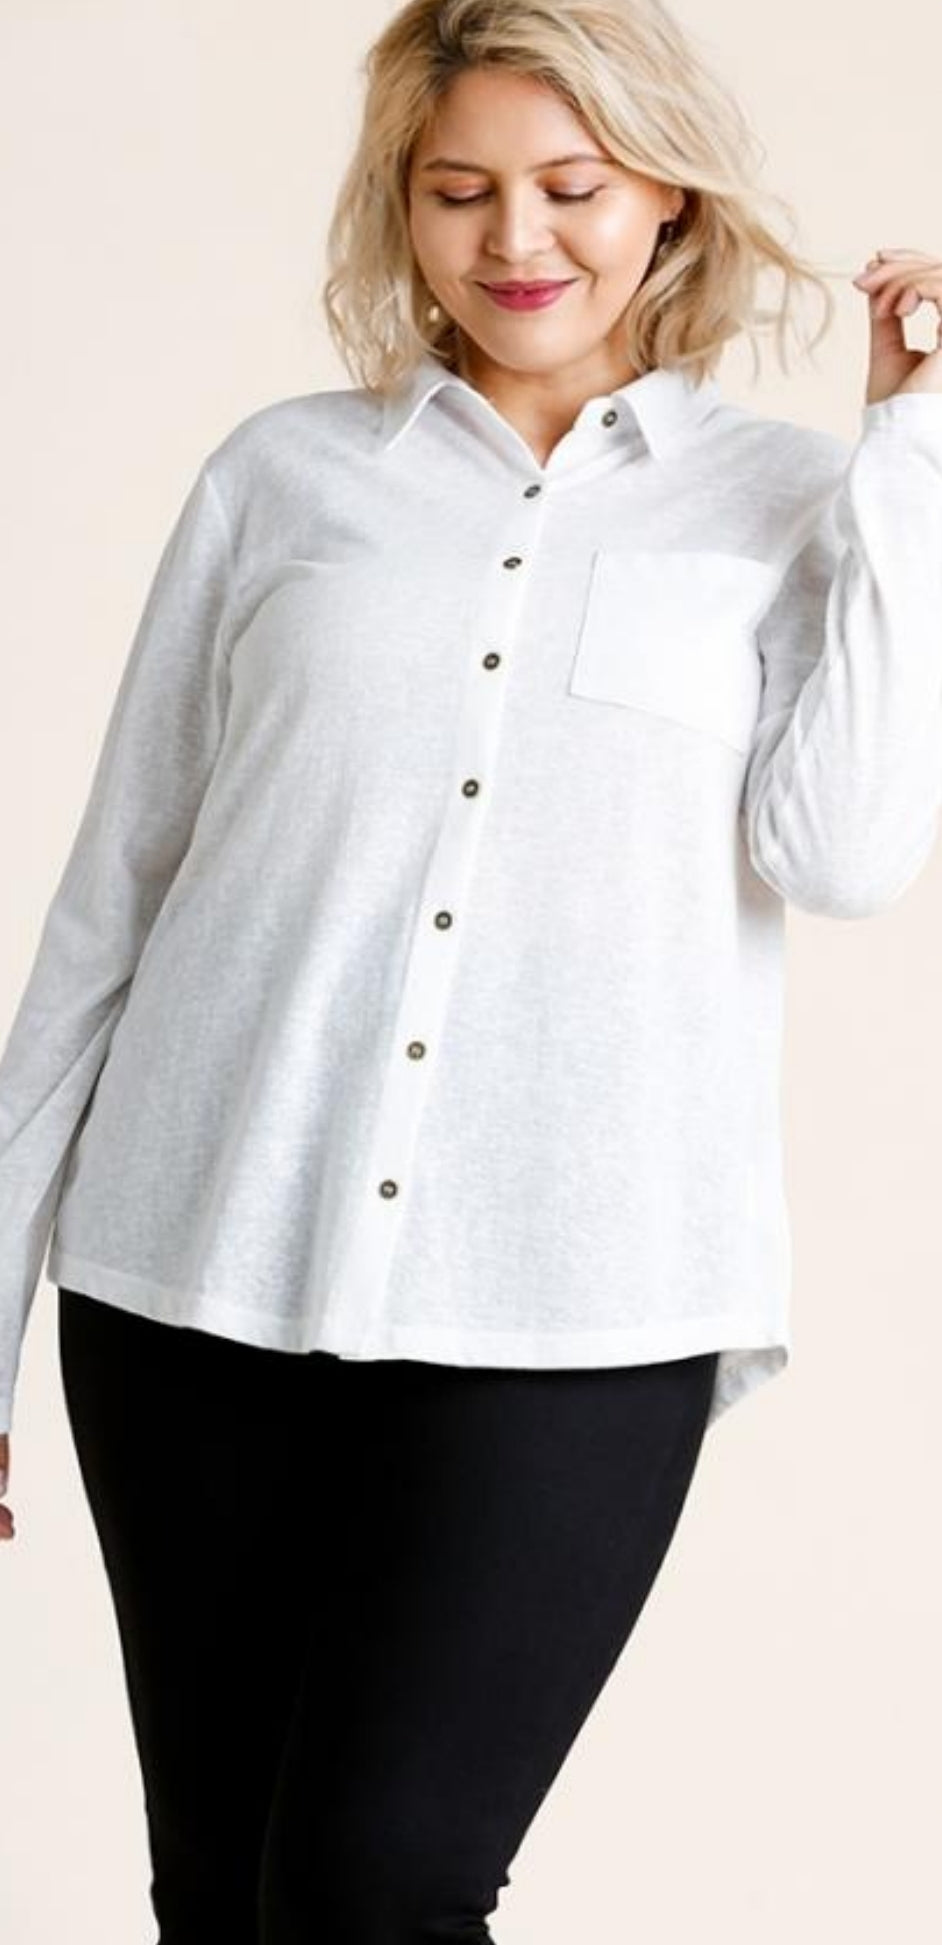 Curvy Style Collared Long Sleeve Knit!